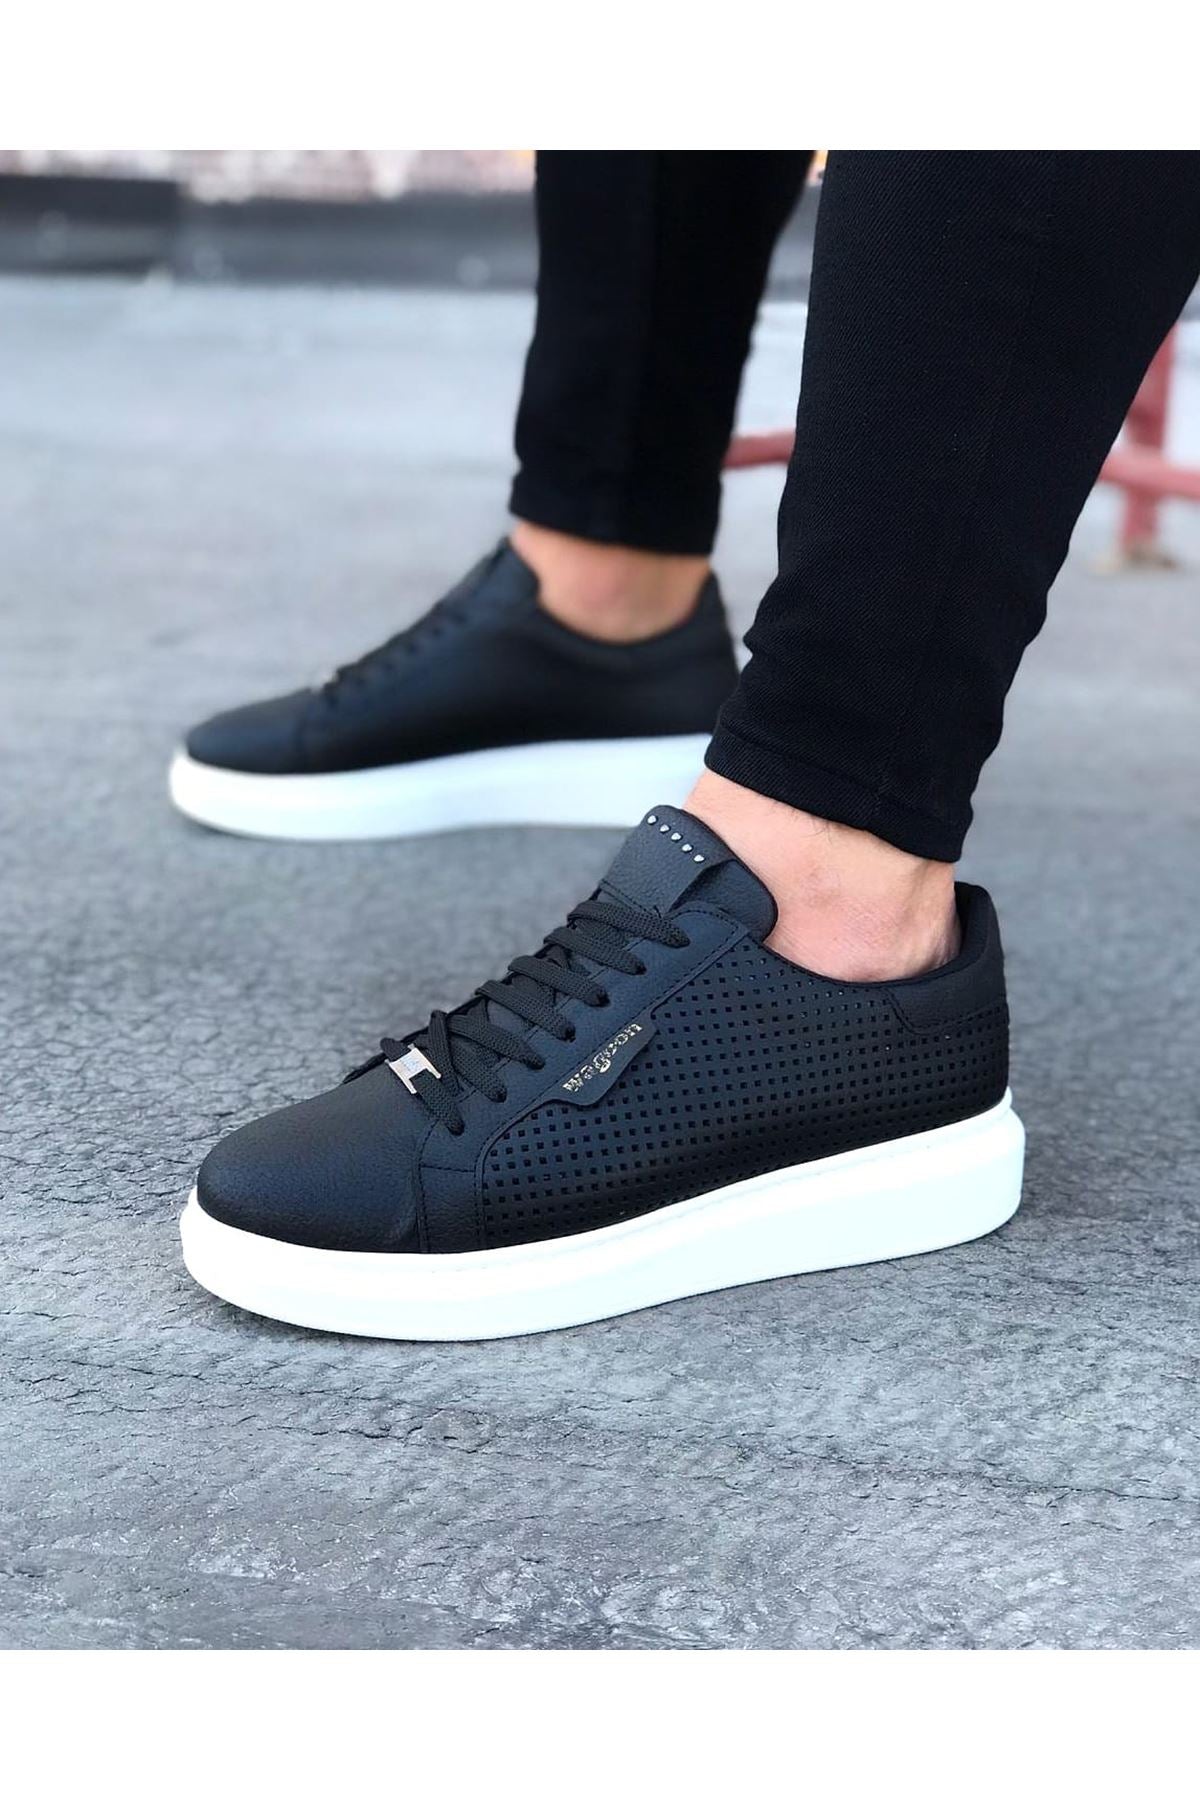 WG01 Black Perforated Men's High-Sole Shoes sneakers - STREETMODE™